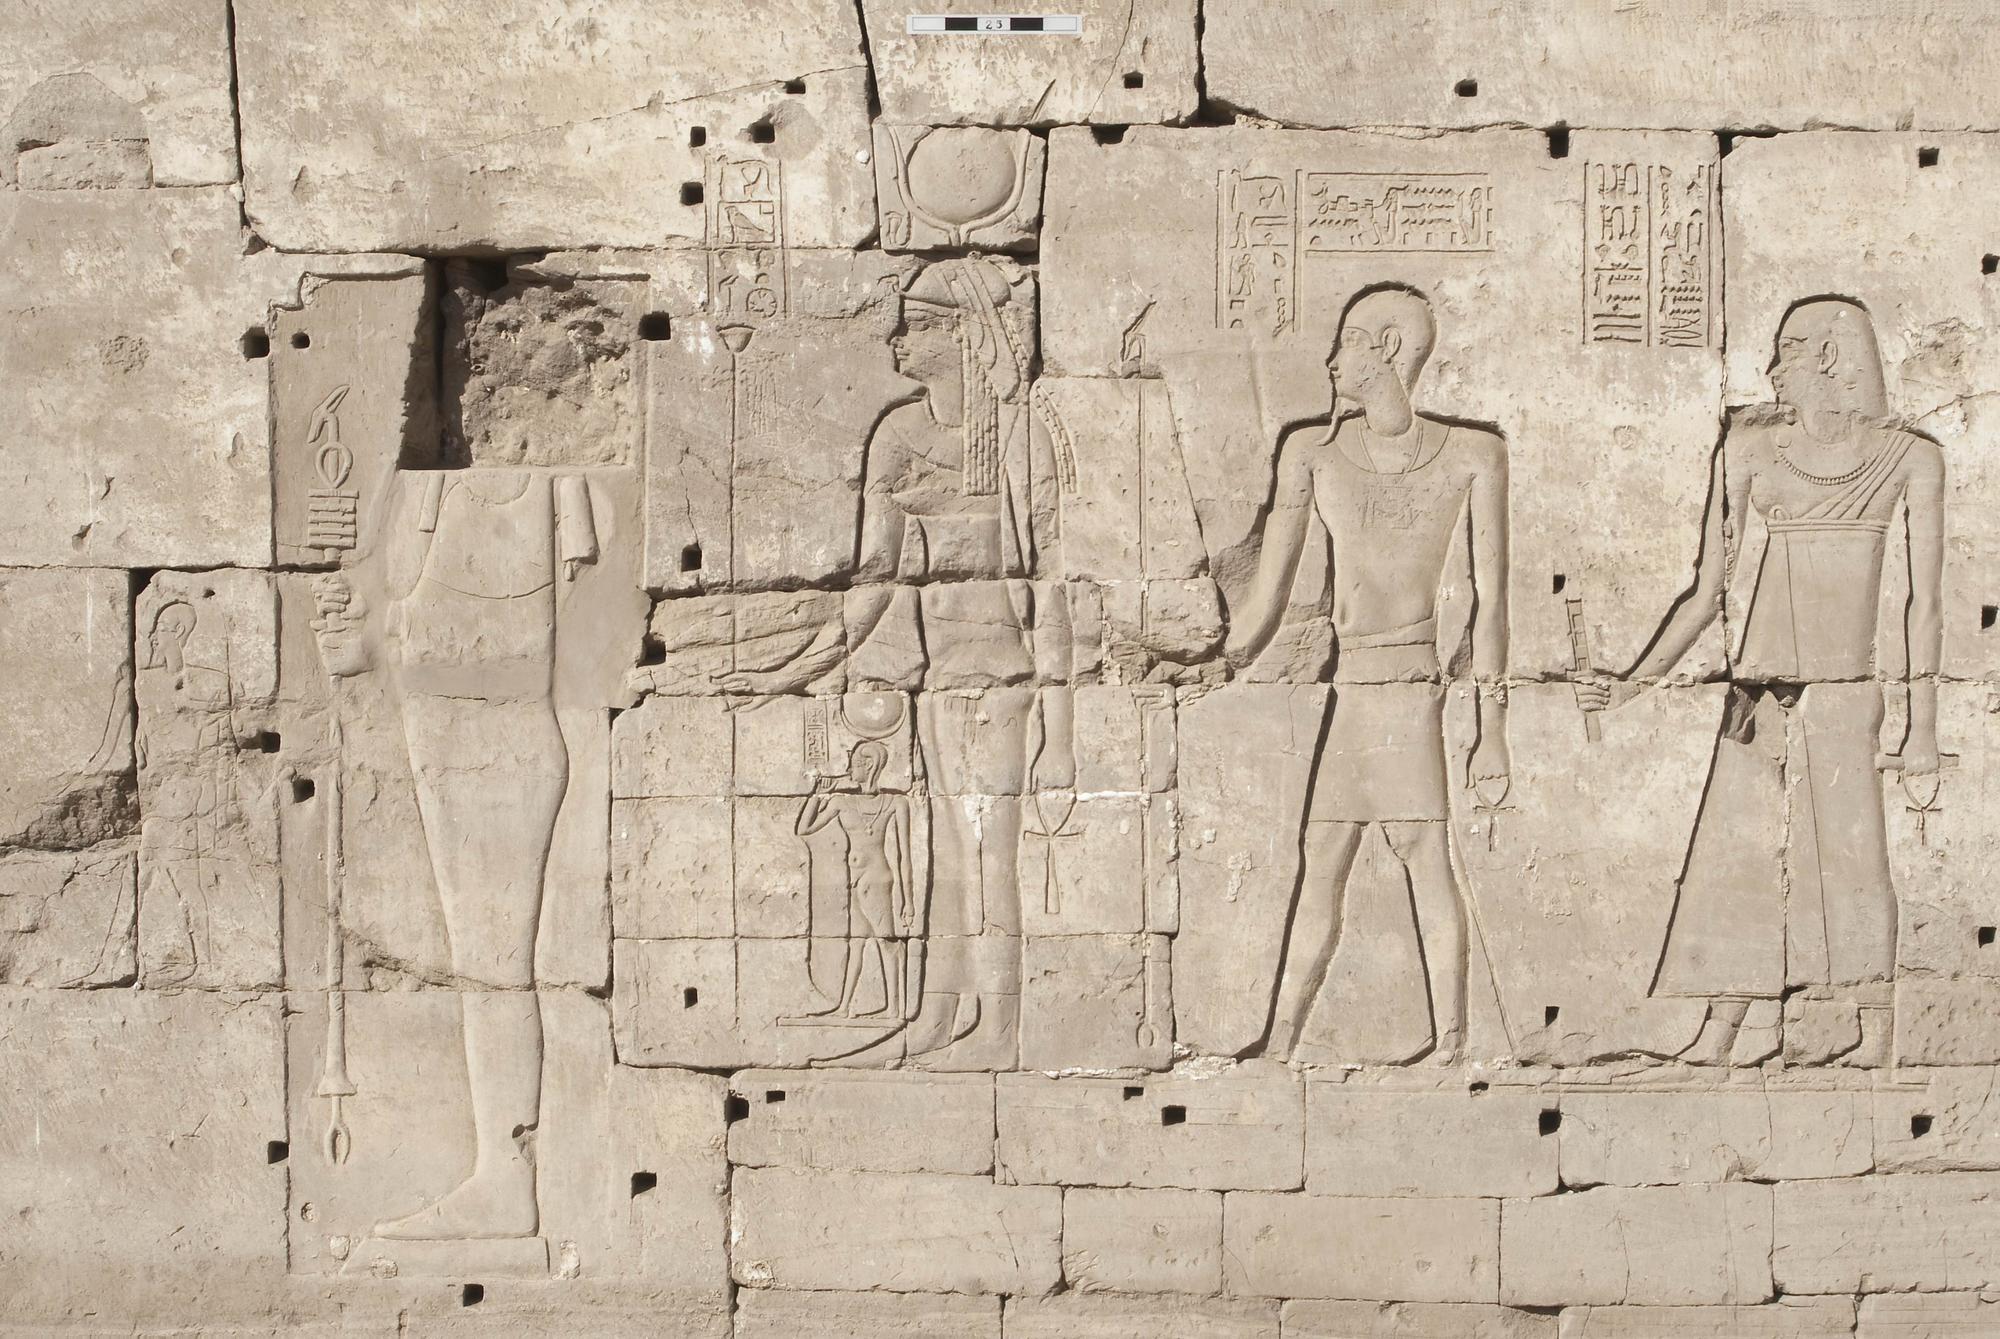 A graffito scene invoking Imhotep at Ptah Temple Karnak